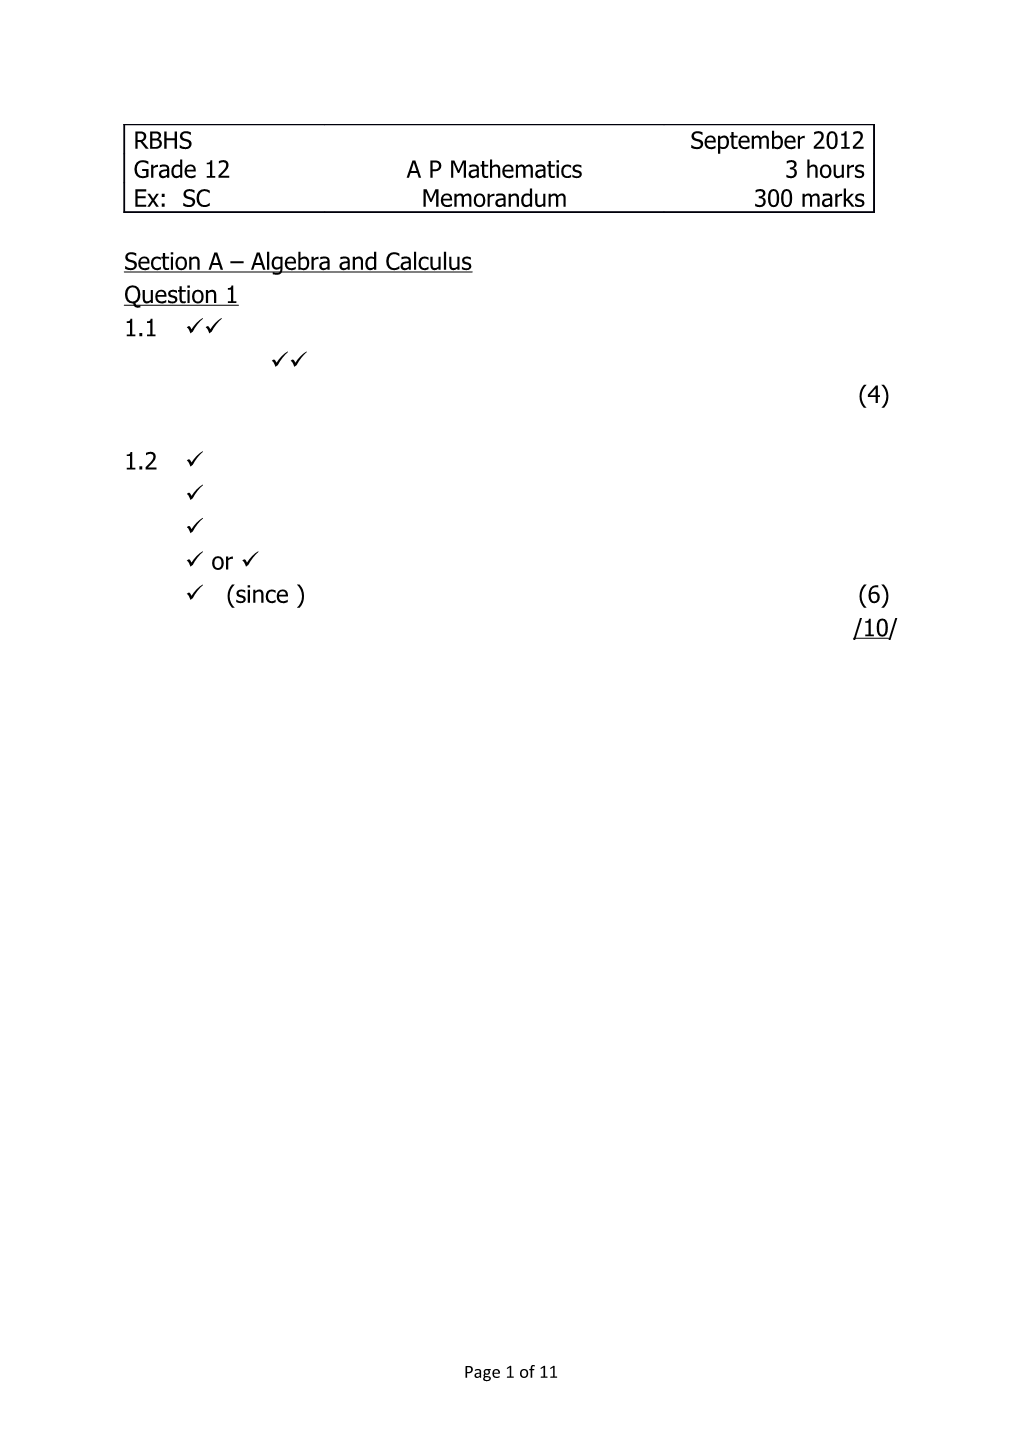 Section a Algebra and Calculus